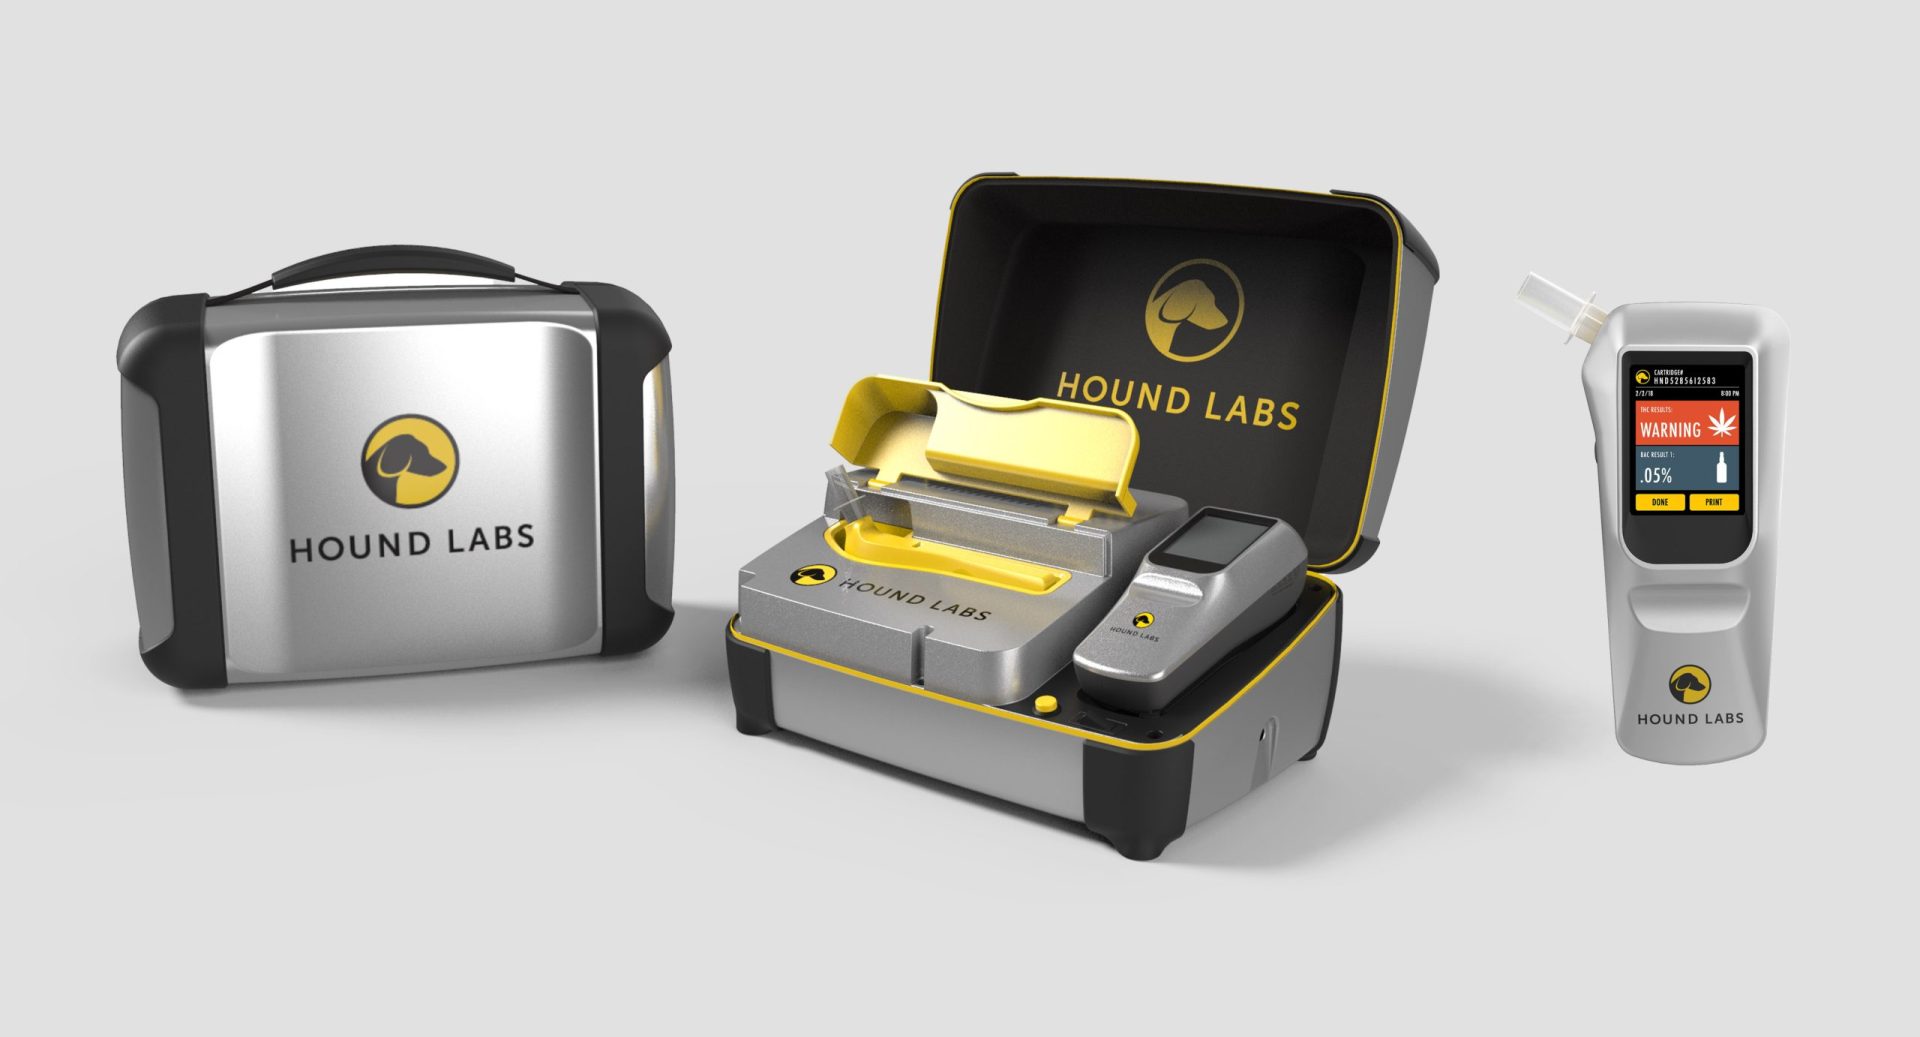 A portable cannabis breathalyzer kit by Hound Labs with carrying case and digital handheld device.